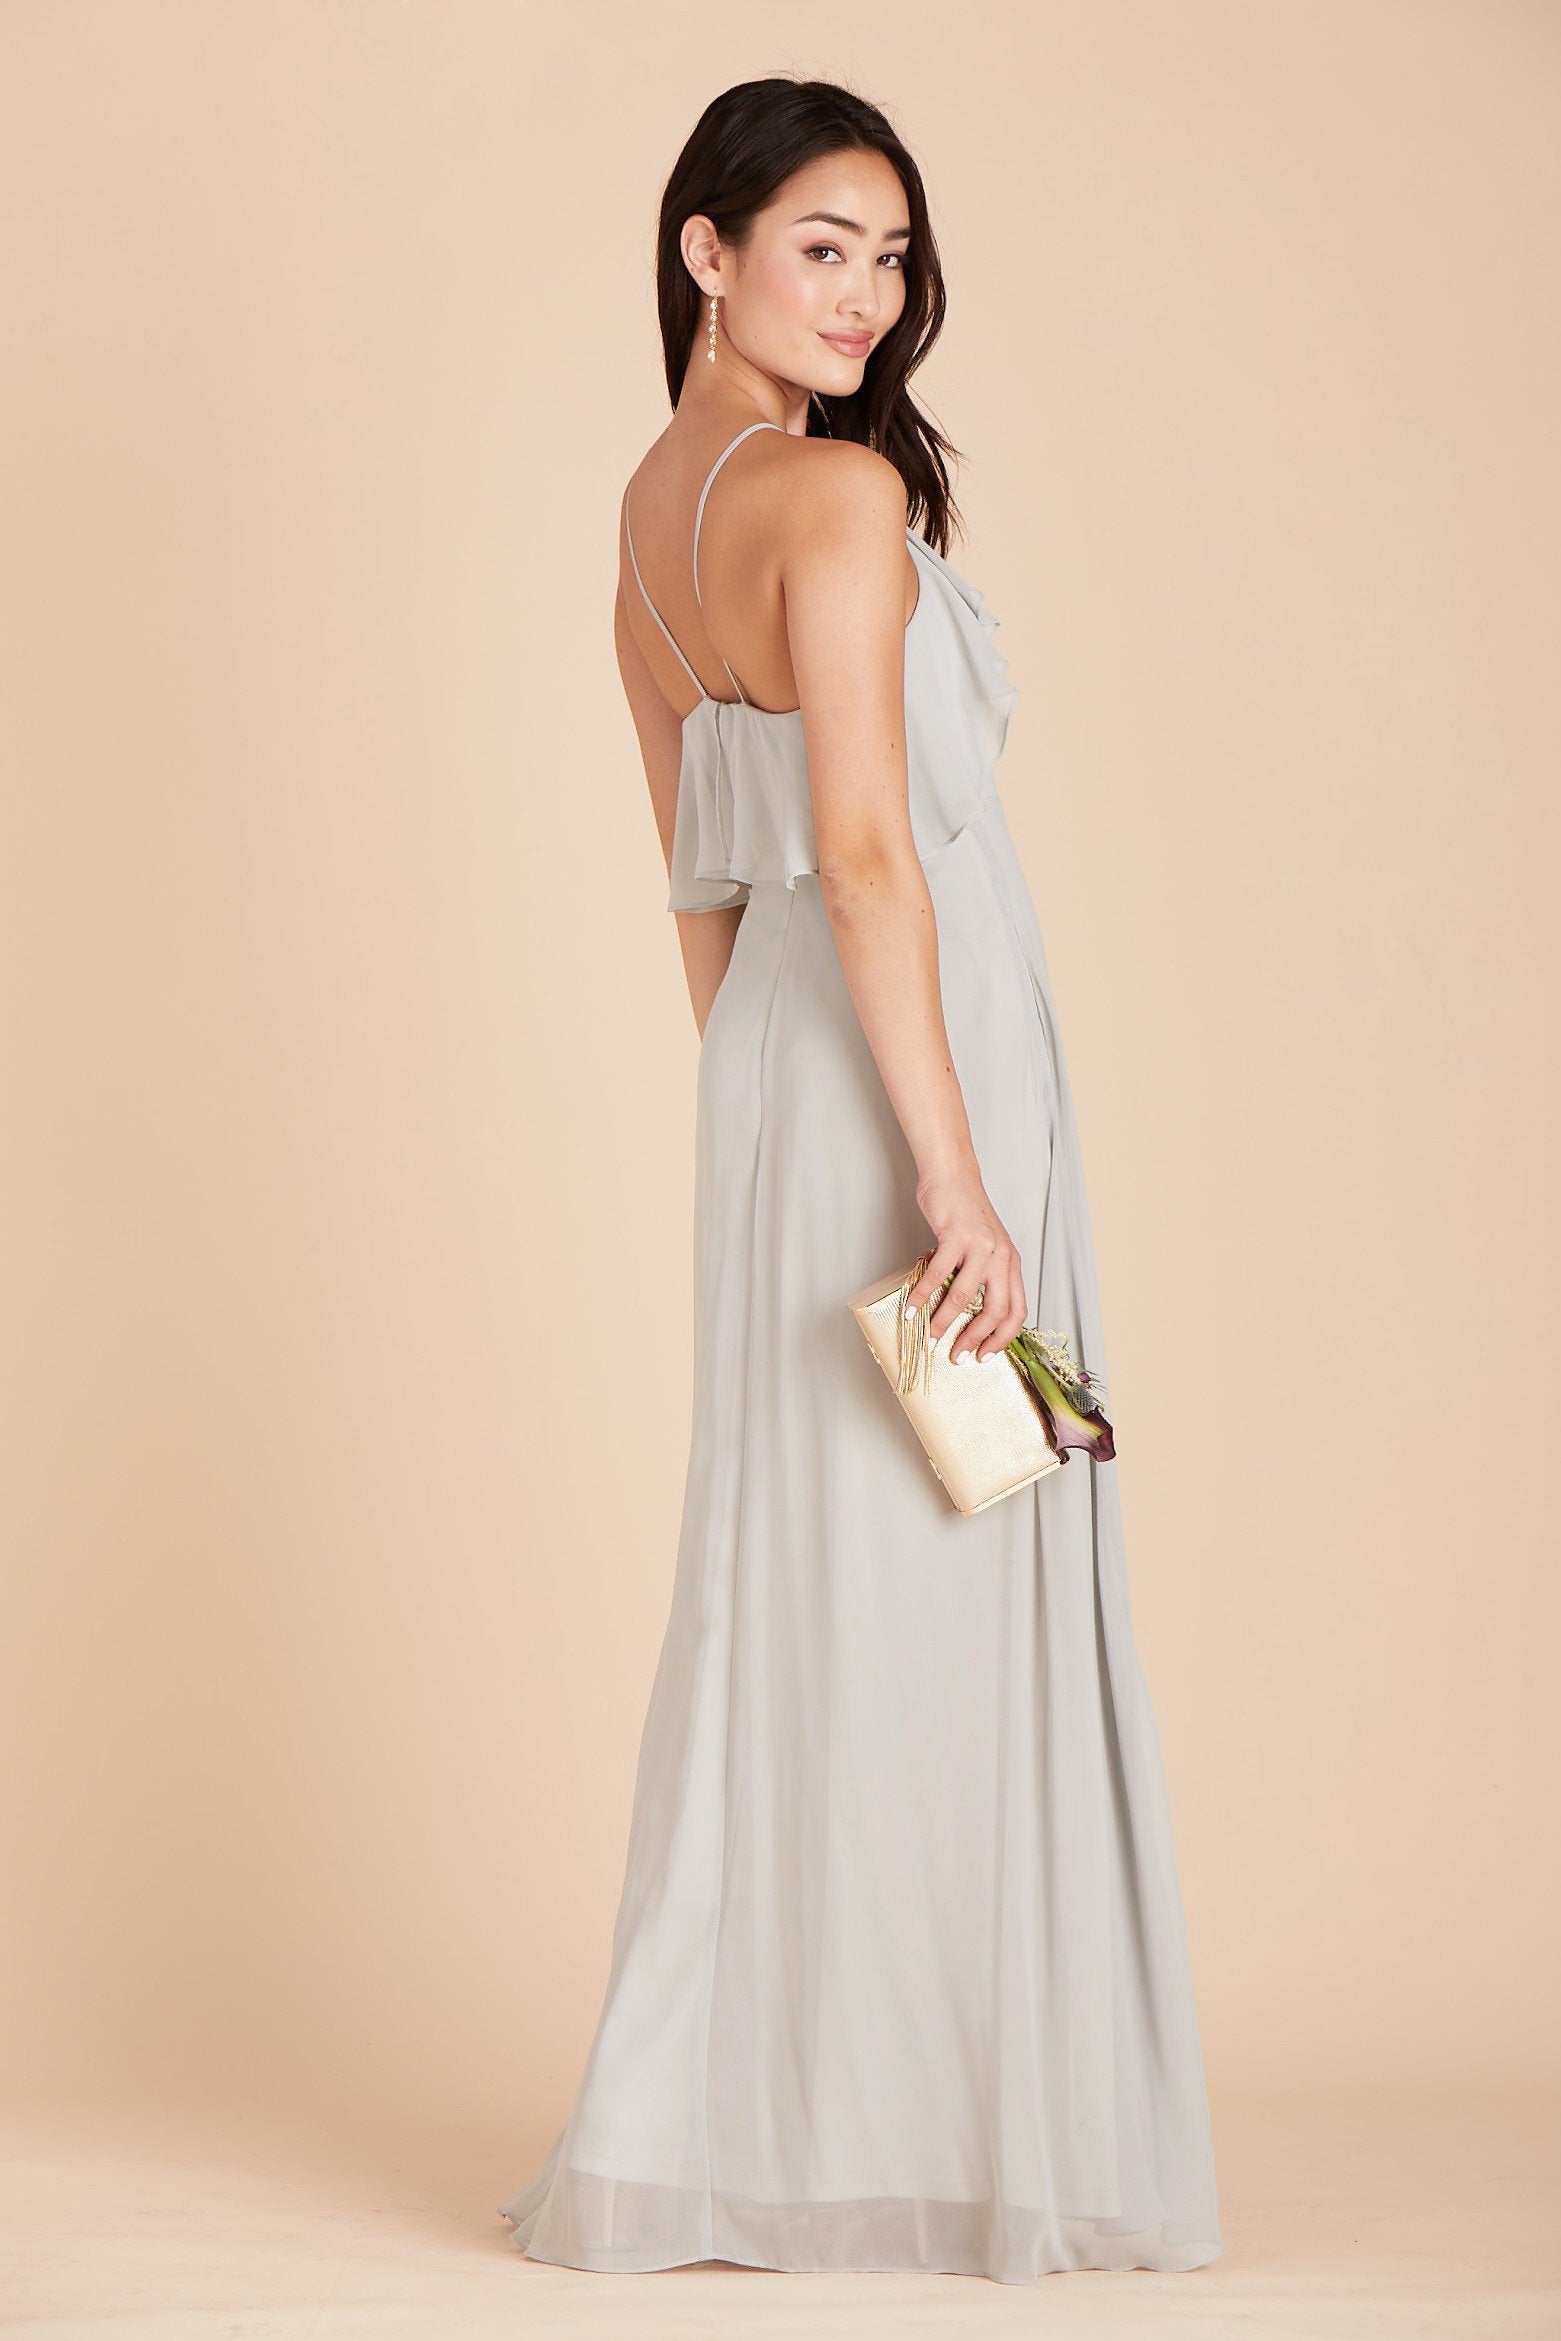 Jules bridesmaid dress in dove gray chiffon by Birdy Grey, side view